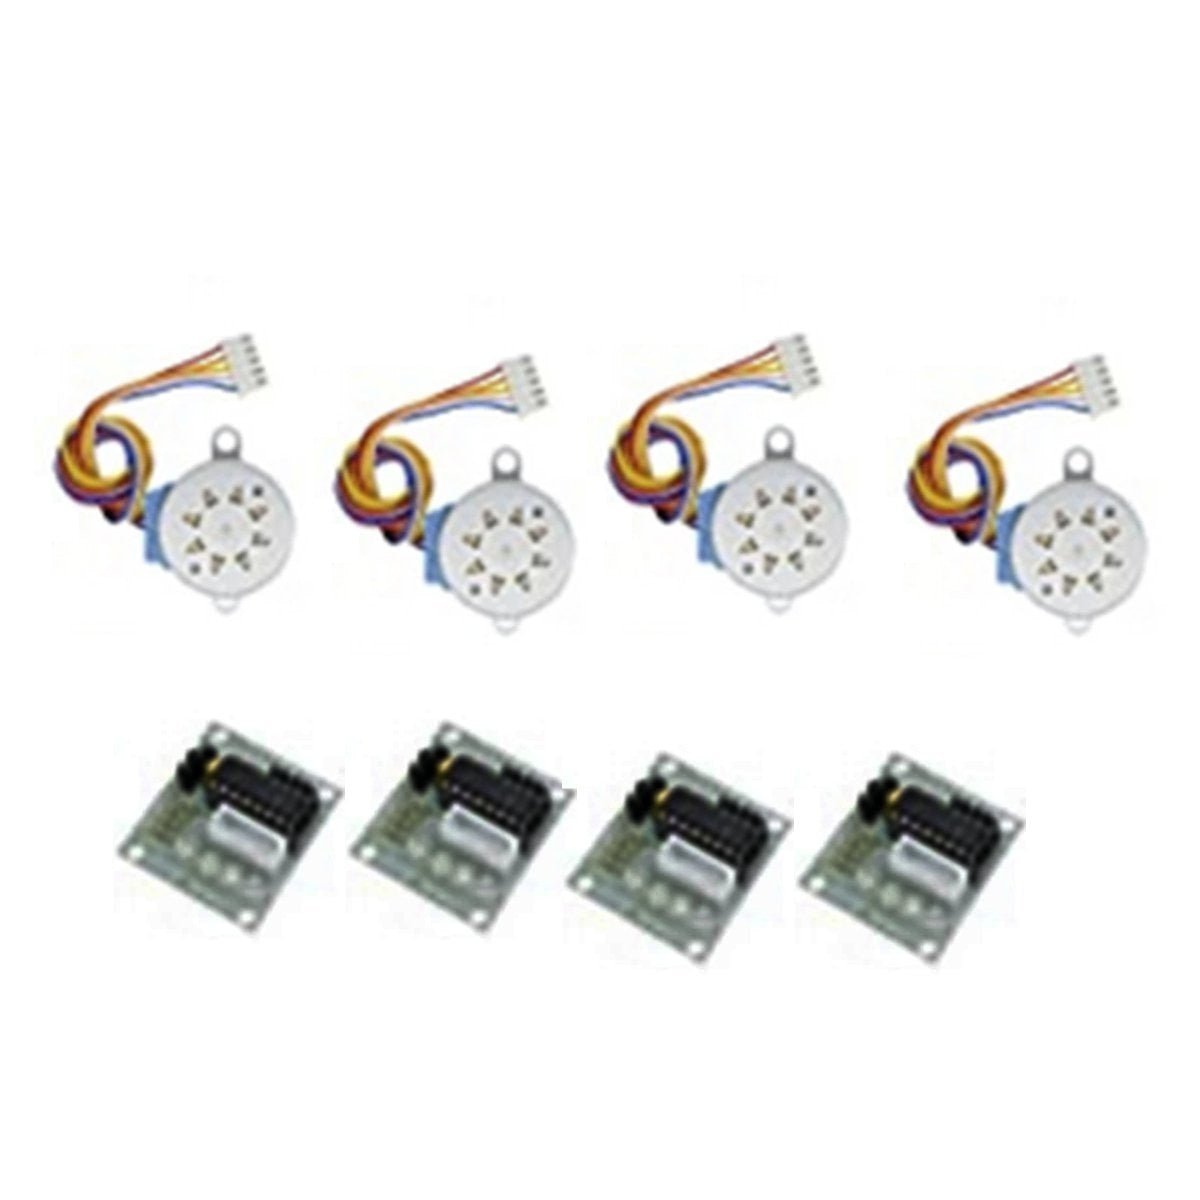 4pcs 4 Phase Stepper Motor 28BYJ-48 5V Driver Test Module Board - Asia Sell